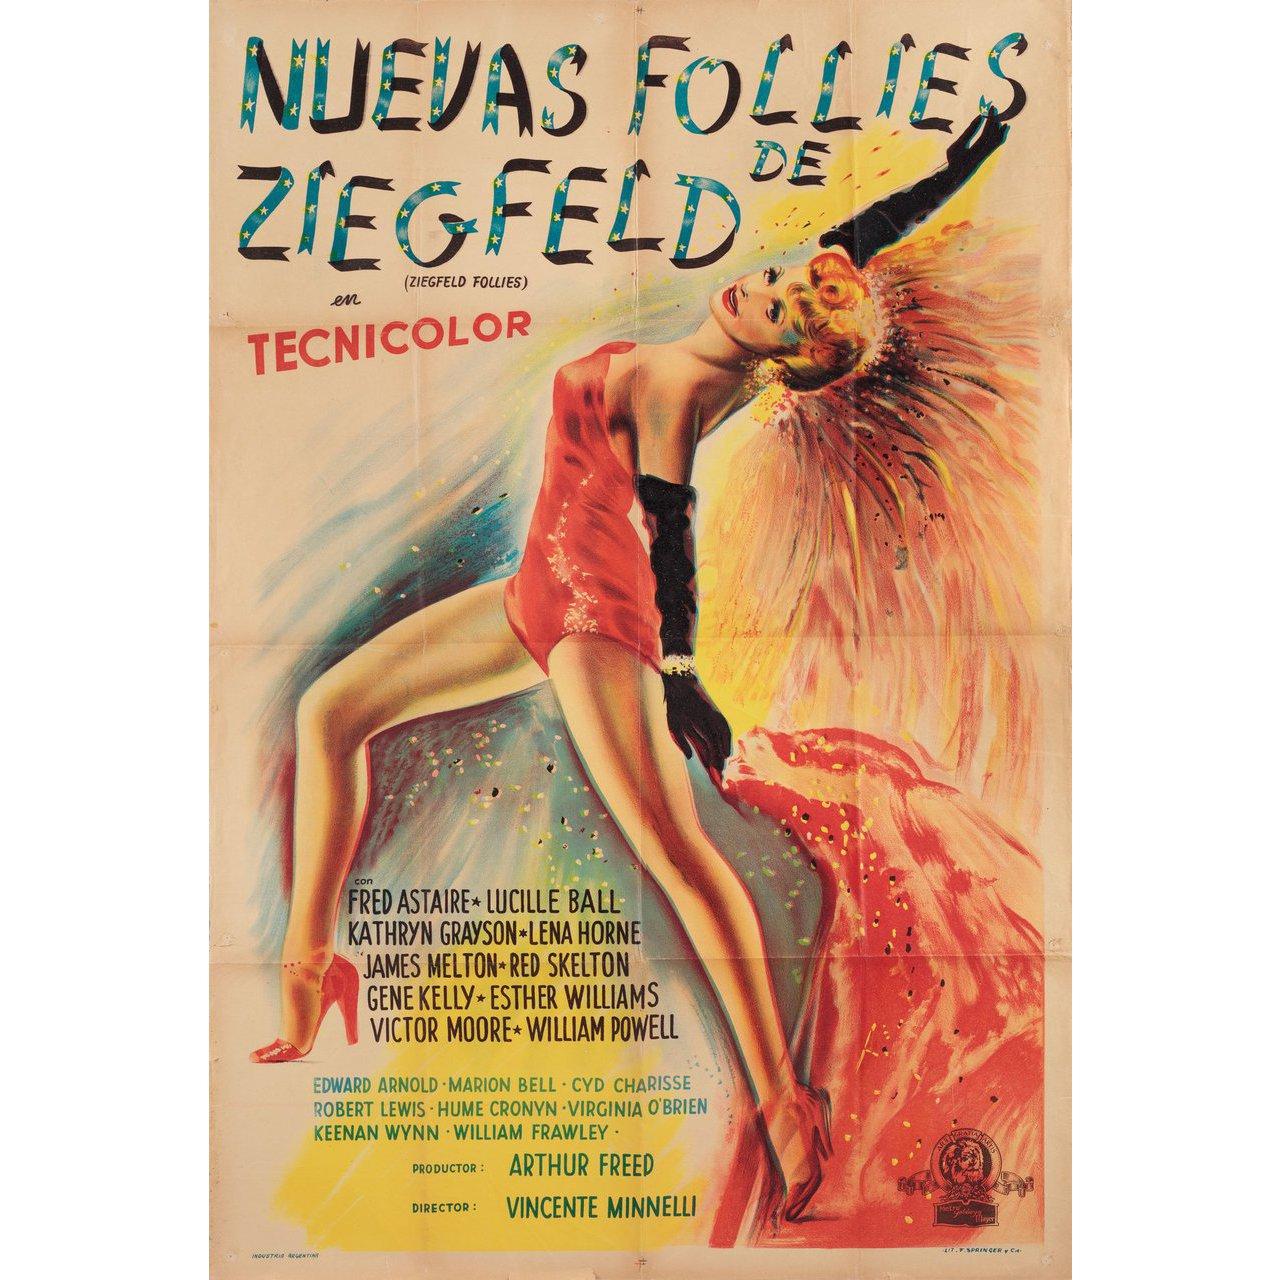 Original 1946 Argentine poster for the film Ziegfeld Follies directed by Lemuel Ayers / Roy Del Ruth / Robert Lewis / Vincente Minnelli / George Sidney / Merrill Pye / Charles Walters with Fred Astaire / Lucille Ball / Lucille Bremer / Fanny Brice.